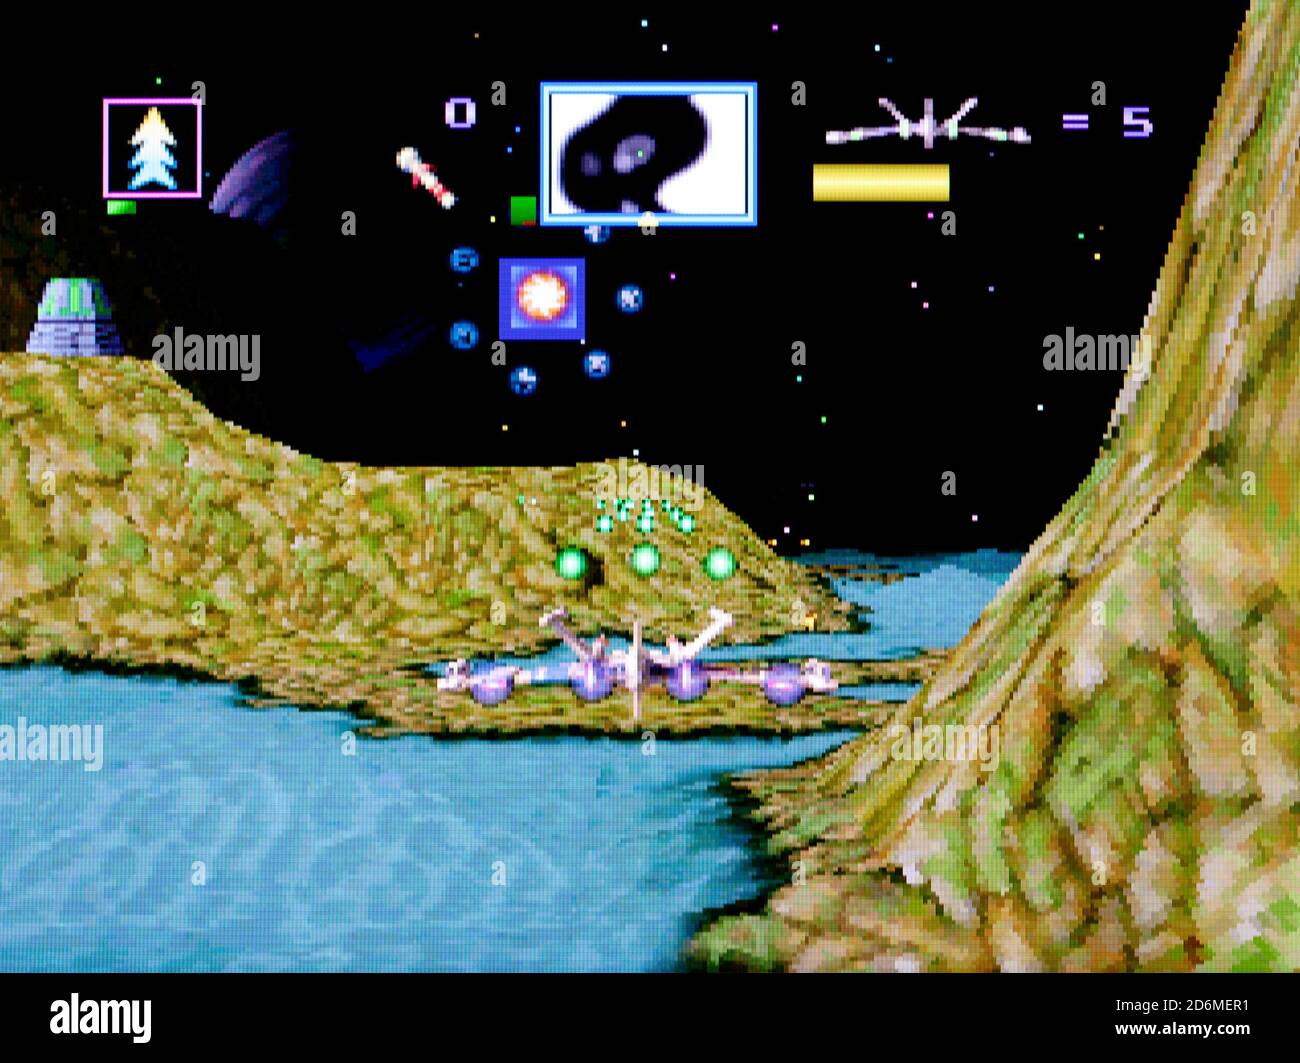 Total Eclipse - 3DO Interactive Multiplayer Videogame - Editorial Use Only Stock Photo